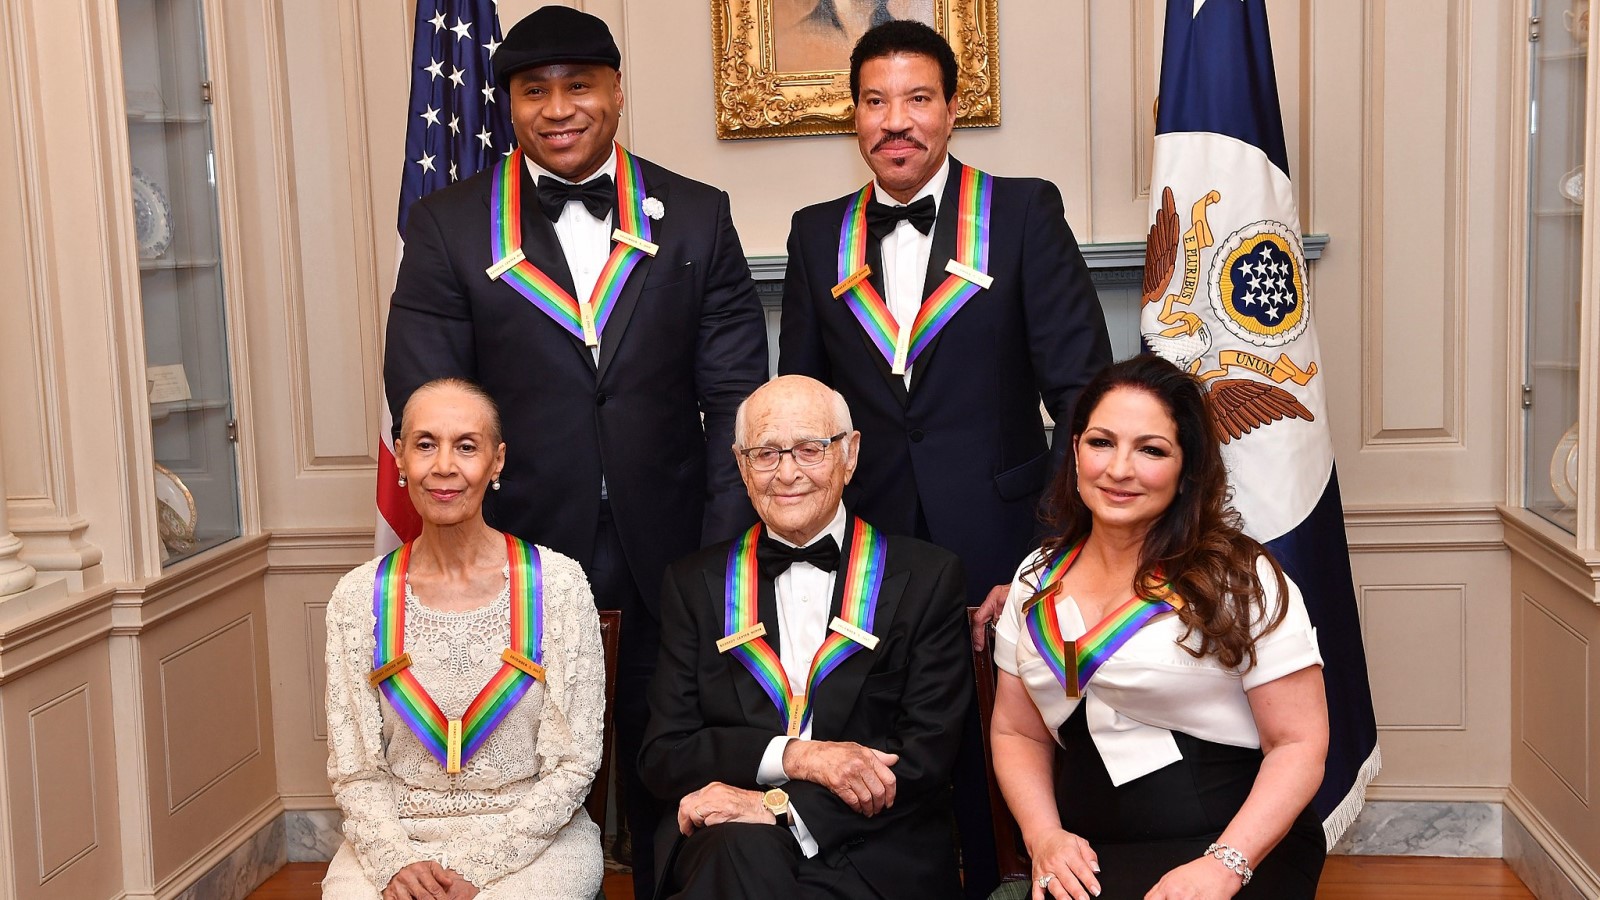 Watch 'Kennedy Center Honors 2019' Online Live Stream Anywhere